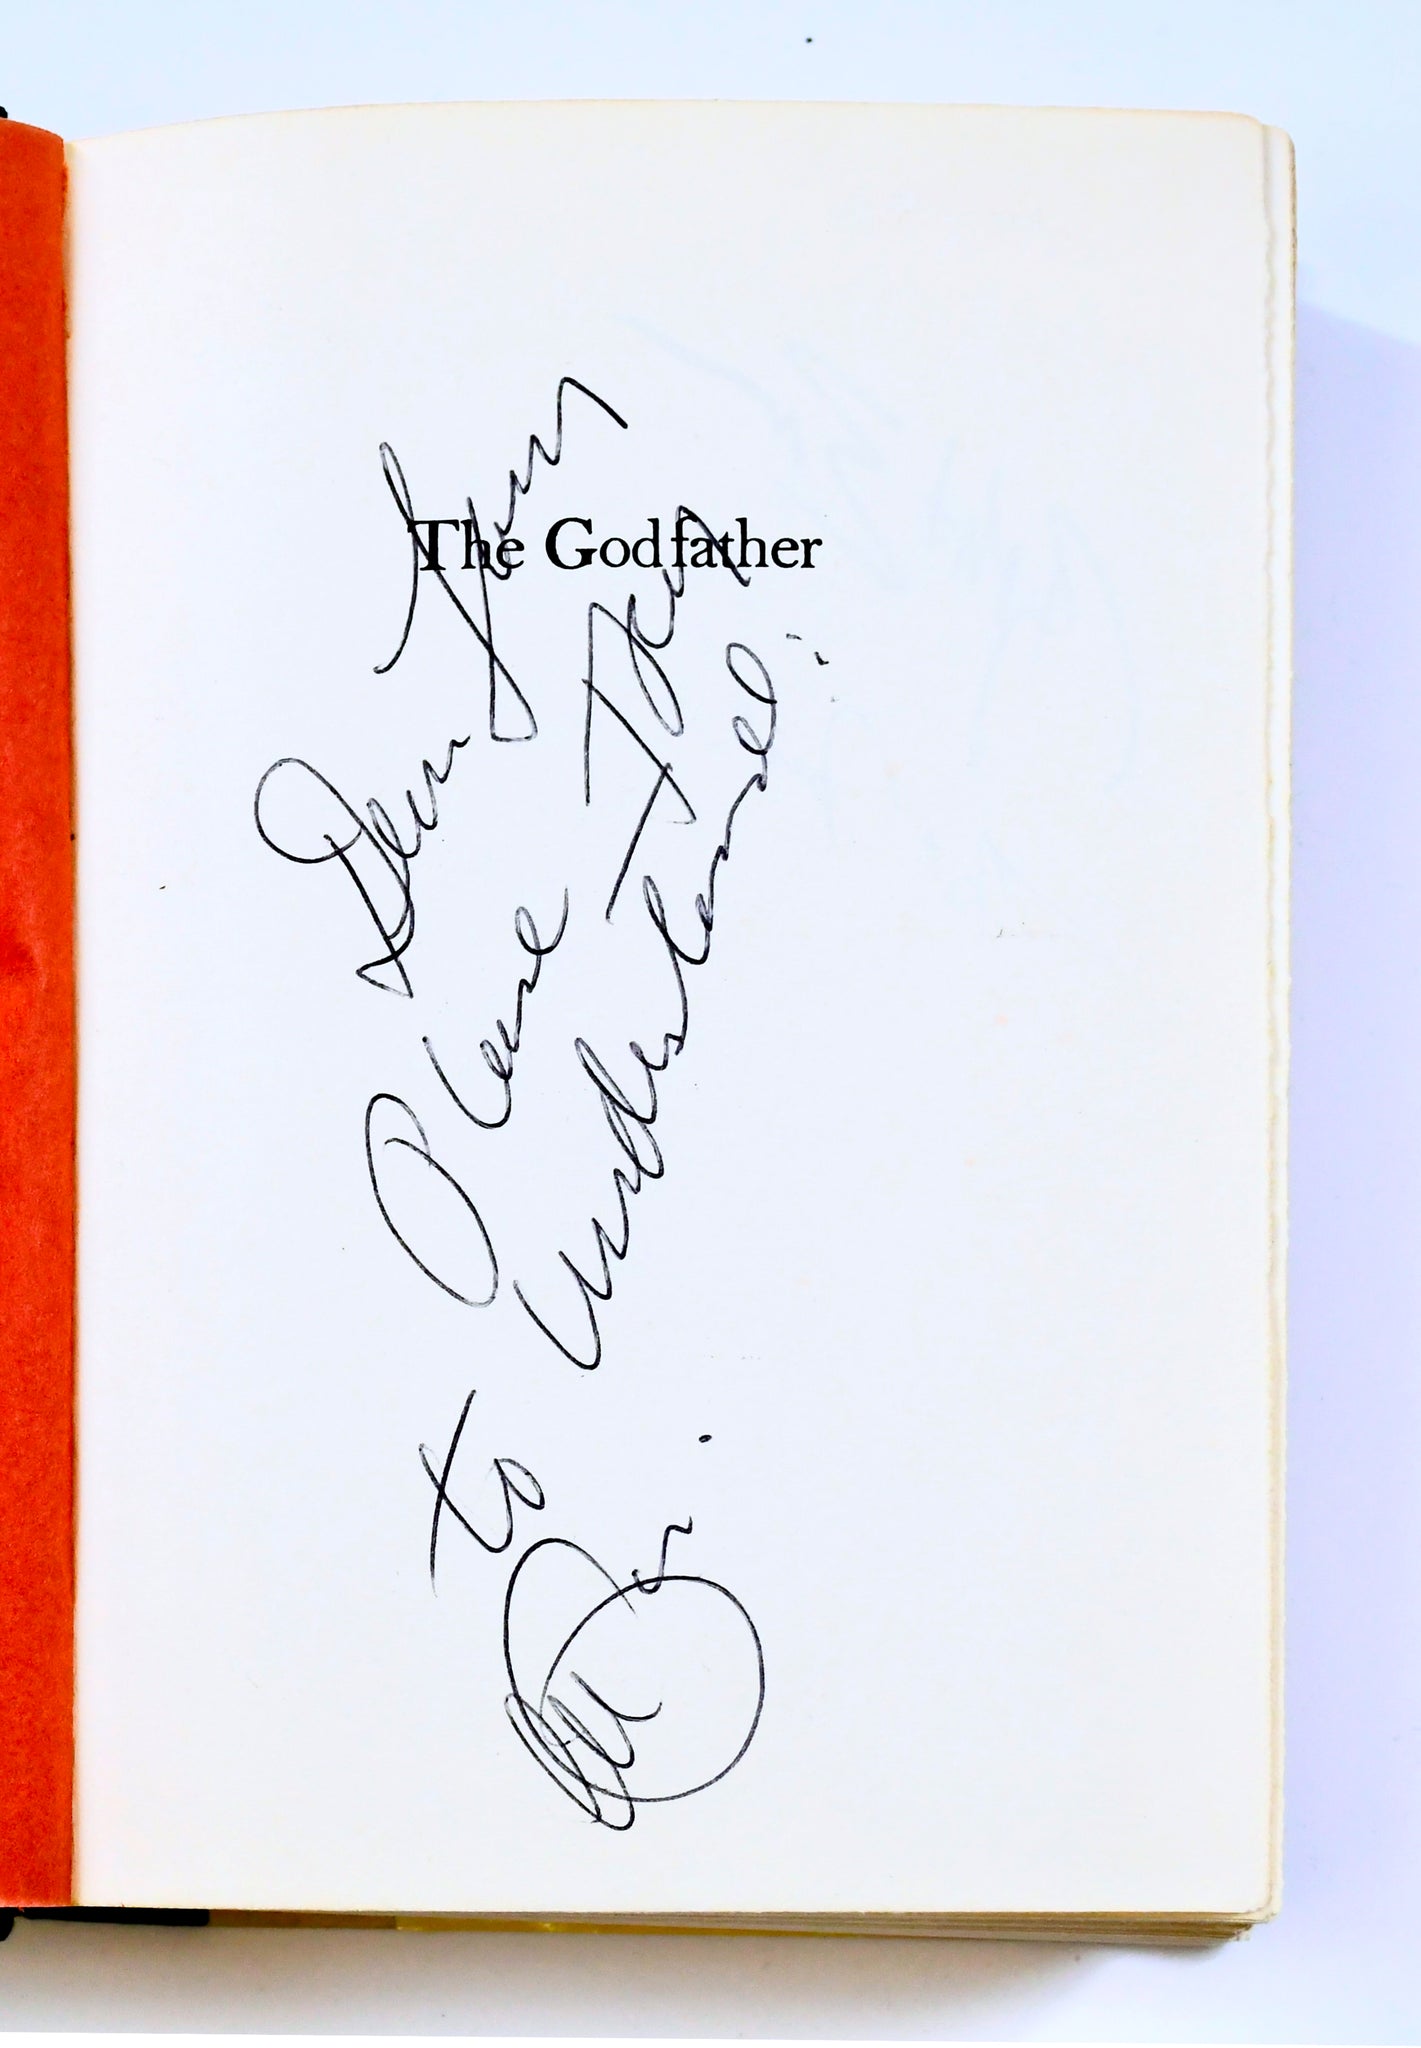 A One-of-a-Kind First Edition of Mario Puzo's The Godfather, signed by him, Francis Ford Coppola, Al Pacino, Diane Keaton, Robert Evans, and Robert Towne